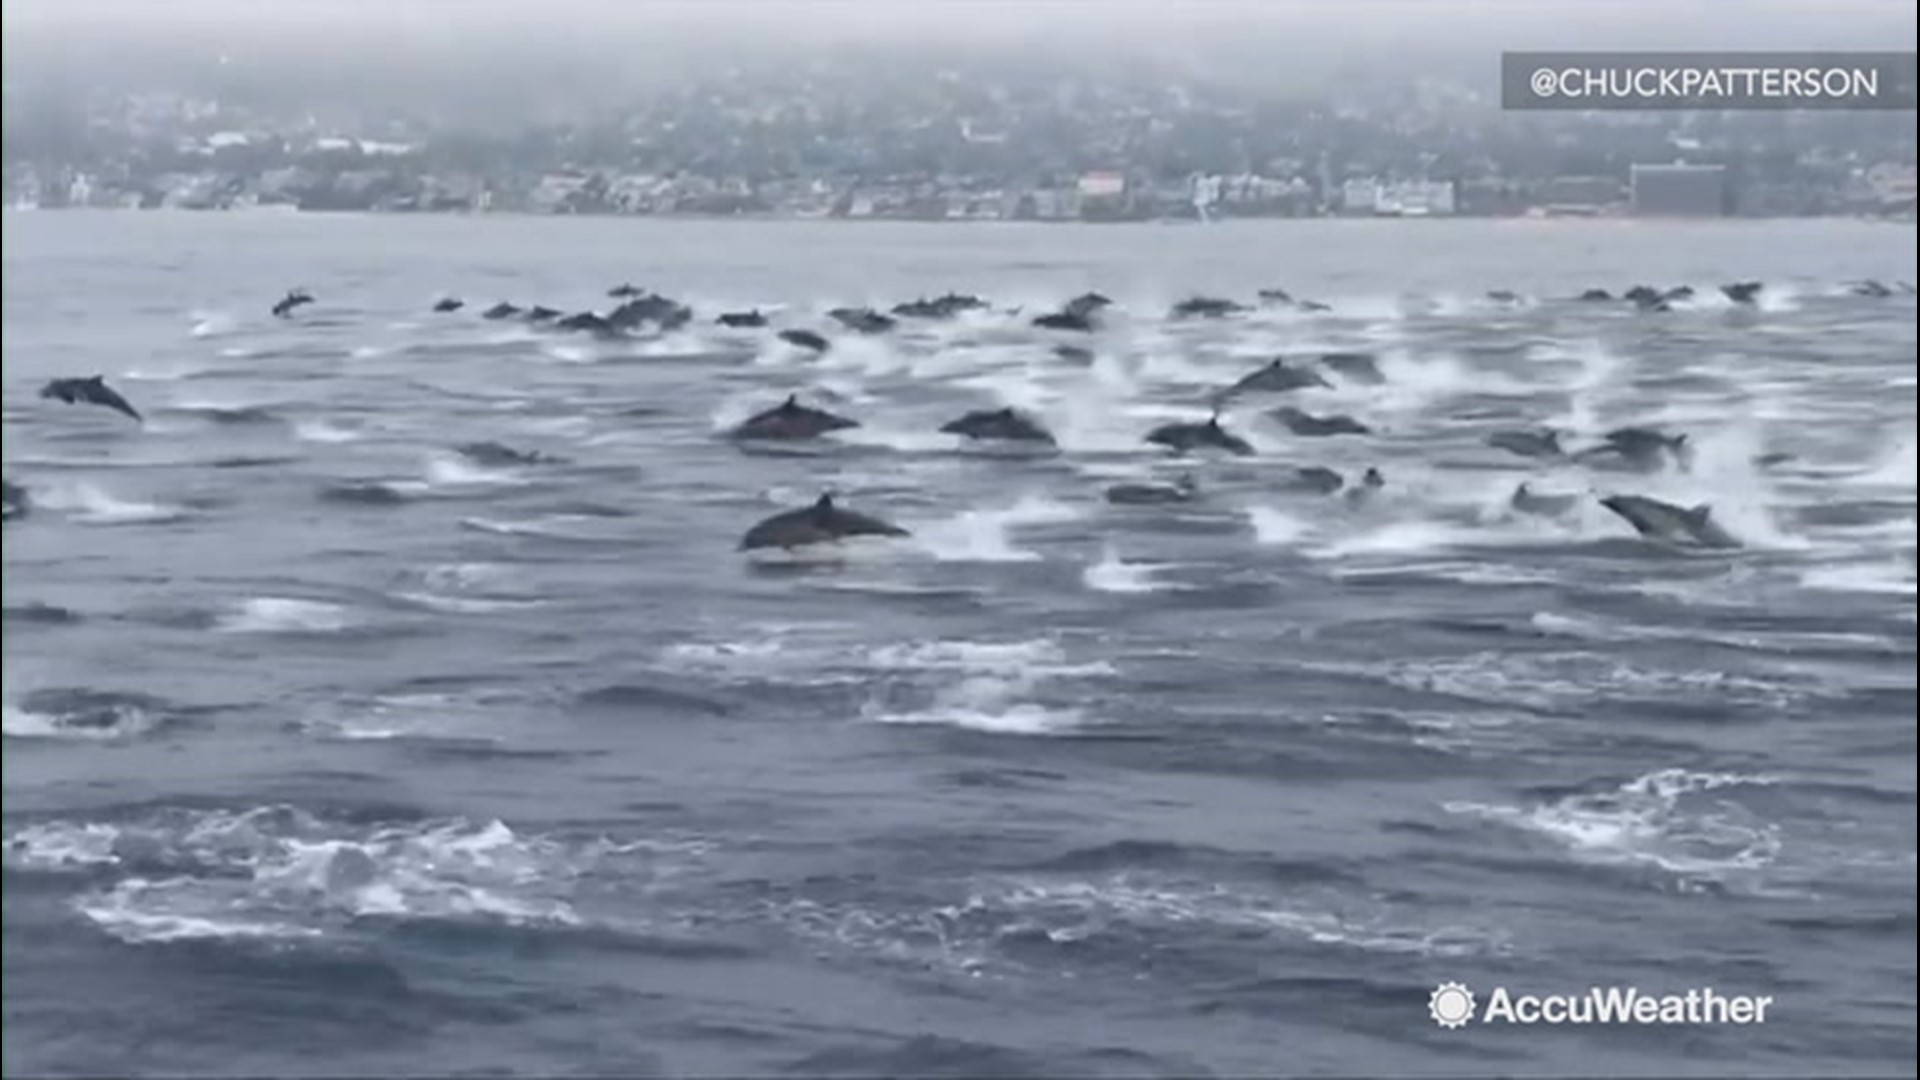 Chuck Patterson filmed the dolphins on one side of the boat just off Laguna Beach recently. He estimated more than a 100 dolphins surrounded the boat with most of the mammals sticking on one side as it raced up the coast.